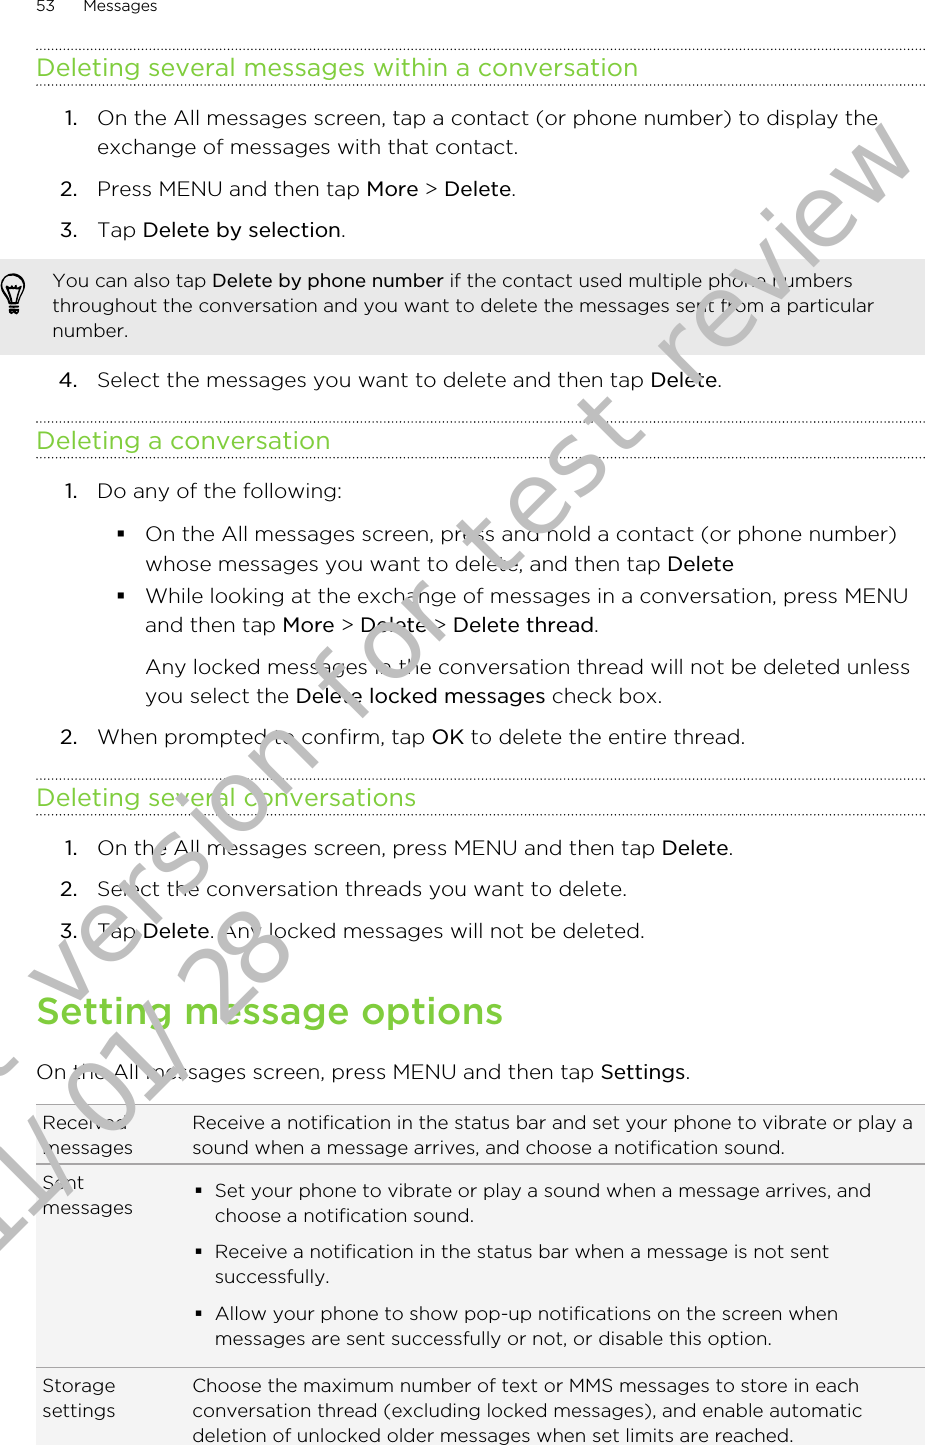 Deleting several messages within a conversation1. On the All messages screen, tap a contact (or phone number) to display theexchange of messages with that contact.2. Press MENU and then tap More &gt; Delete.3. Tap Delete by selection.You can also tap Delete by phone number if the contact used multiple phone numbersthroughout the conversation and you want to delete the messages sent from a particularnumber.4. Select the messages you want to delete and then tap Delete.Deleting a conversation1. Do any of the following:§On the All messages screen, press and hold a contact (or phone number)whose messages you want to delete, and then tap Delete§While looking at the exchange of messages in a conversation, press MENUand then tap More &gt; Delete &gt; Delete thread.Any locked messages in the conversation thread will not be deleted unlessyou select the Delete locked messages check box.2. When prompted to confirm, tap OK to delete the entire thread.Deleting several conversations1. On the All messages screen, press MENU and then tap Delete.2. Select the conversation threads you want to delete.3. Tap Delete. Any locked messages will not be deleted.Setting message optionsOn the All messages screen, press MENU and then tap Settings.ReceivedmessagesReceive a notification in the status bar and set your phone to vibrate or play asound when a message arrives, and choose a notification sound.Sentmessages §Set your phone to vibrate or play a sound when a message arrives, andchoose a notification sound.§Receive a notification in the status bar when a message is not sentsuccessfully.§Allow your phone to show pop-up notifications on the screen whenmessages are sent successfully or not, or disable this option.StoragesettingsChoose the maximum number of text or MMS messages to store in eachconversation thread (excluding locked messages), and enable automaticdeletion of unlocked older messages when set limits are reached.53 MessagesDraft version for test review 2011/01/28 